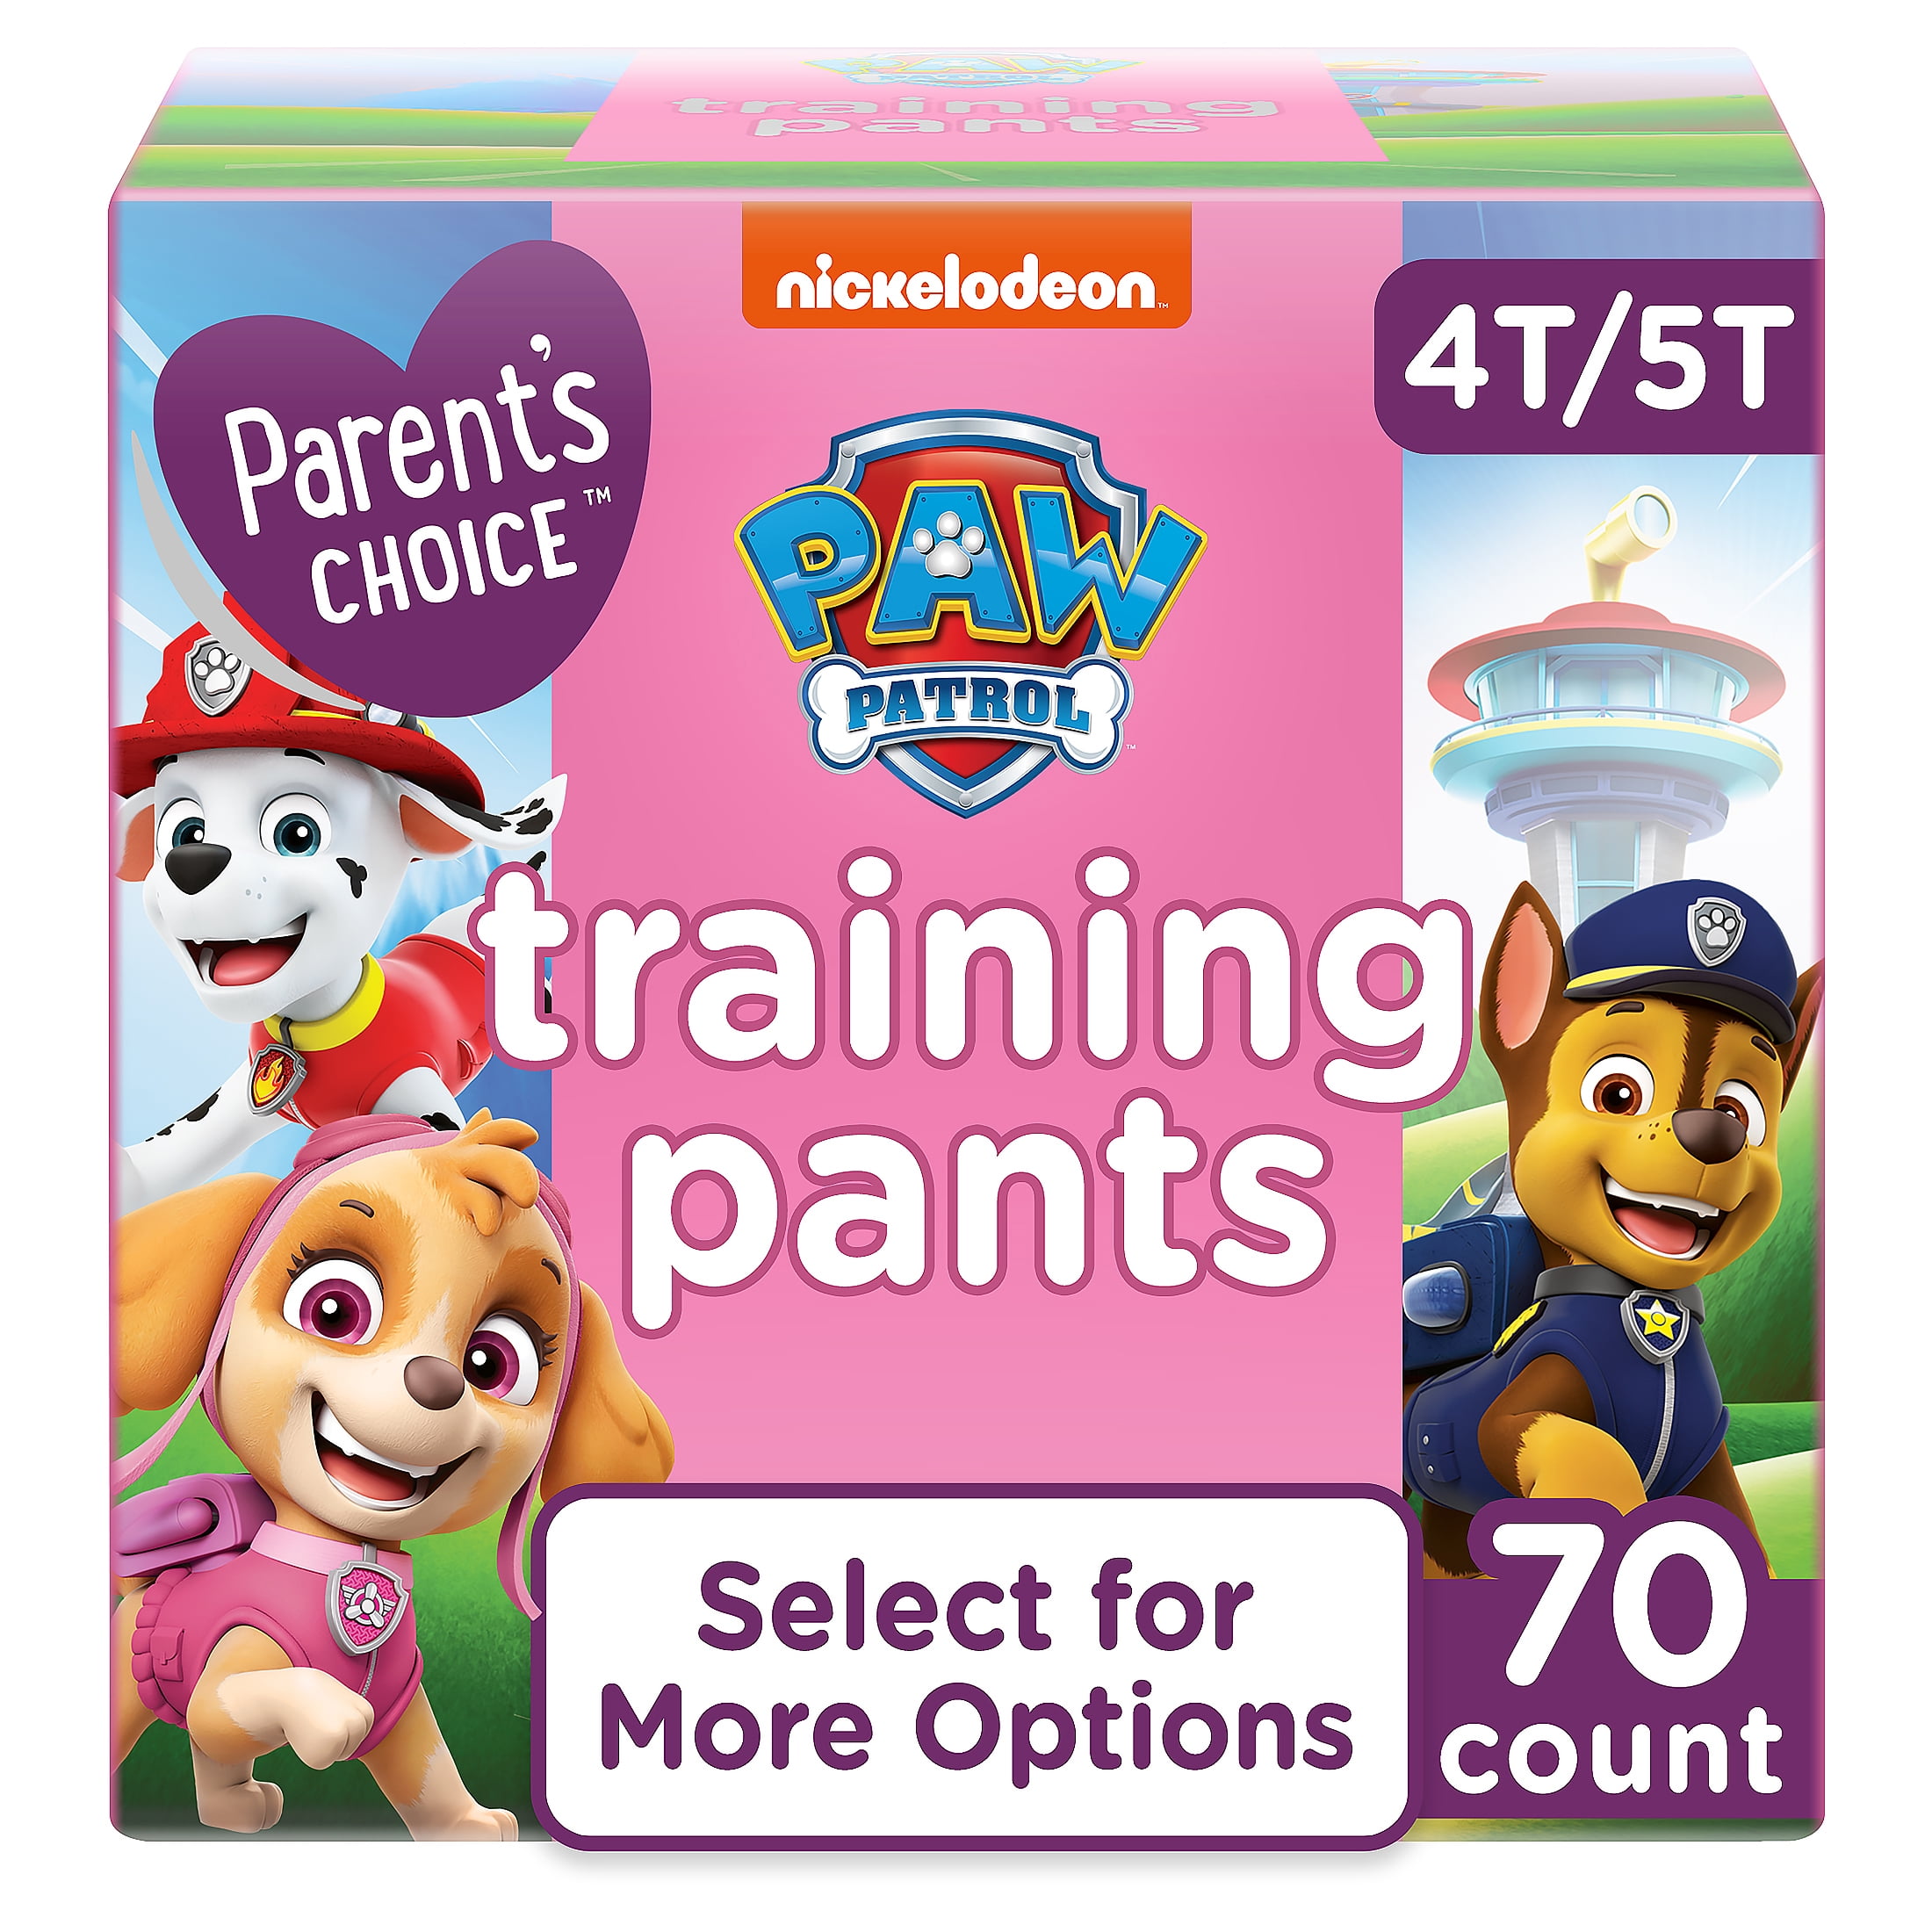 Parent's Choice Paw Patrol Training Pants for Girls, 4T/5T, 70 Count  (Select for More Options)